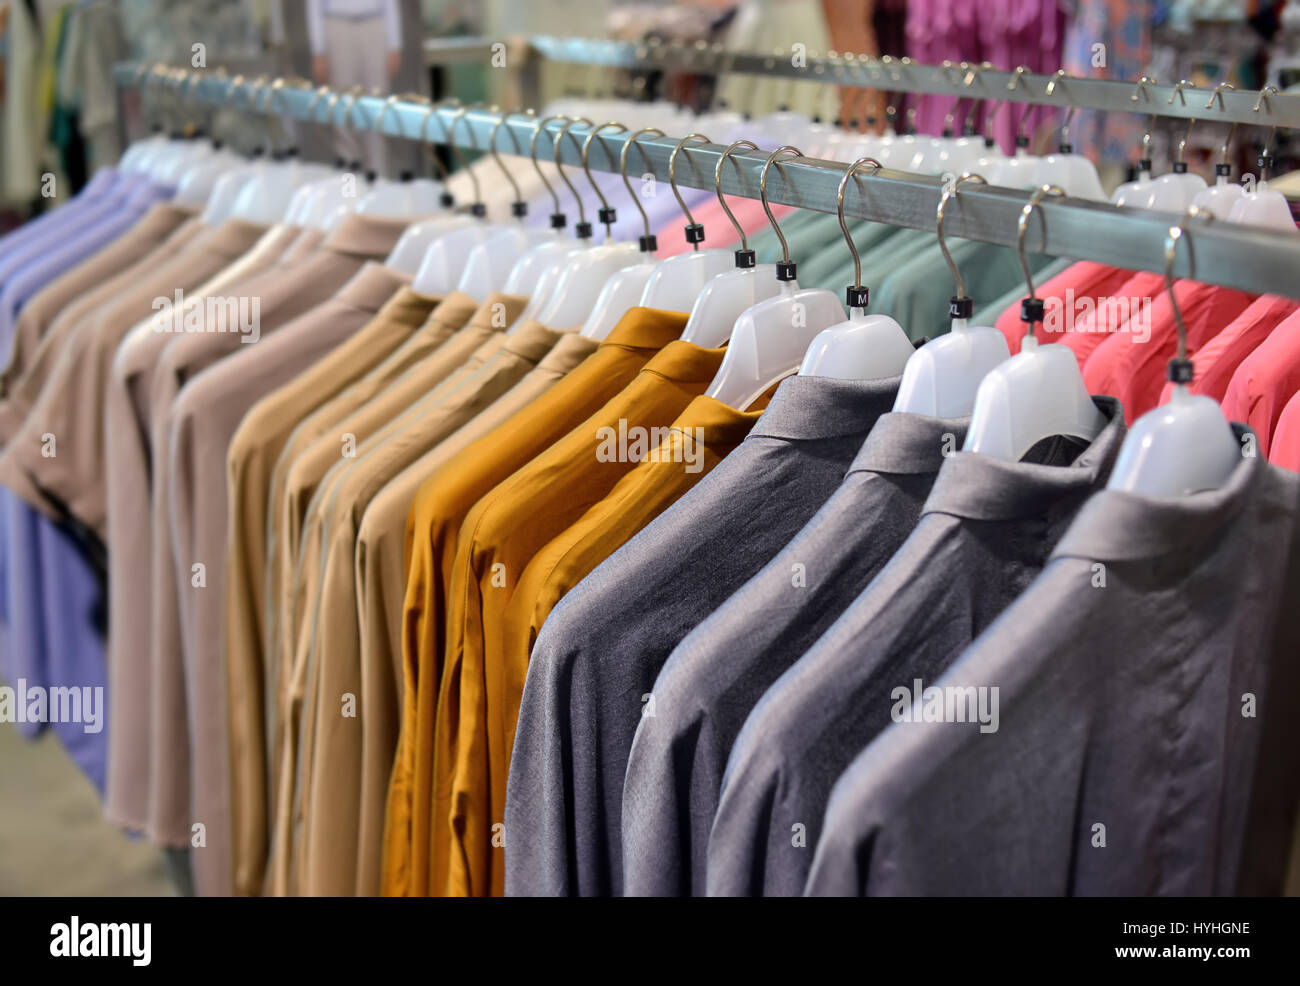 Clothes collection in hangers for sale photo in indoor low lighting. Stock Photo